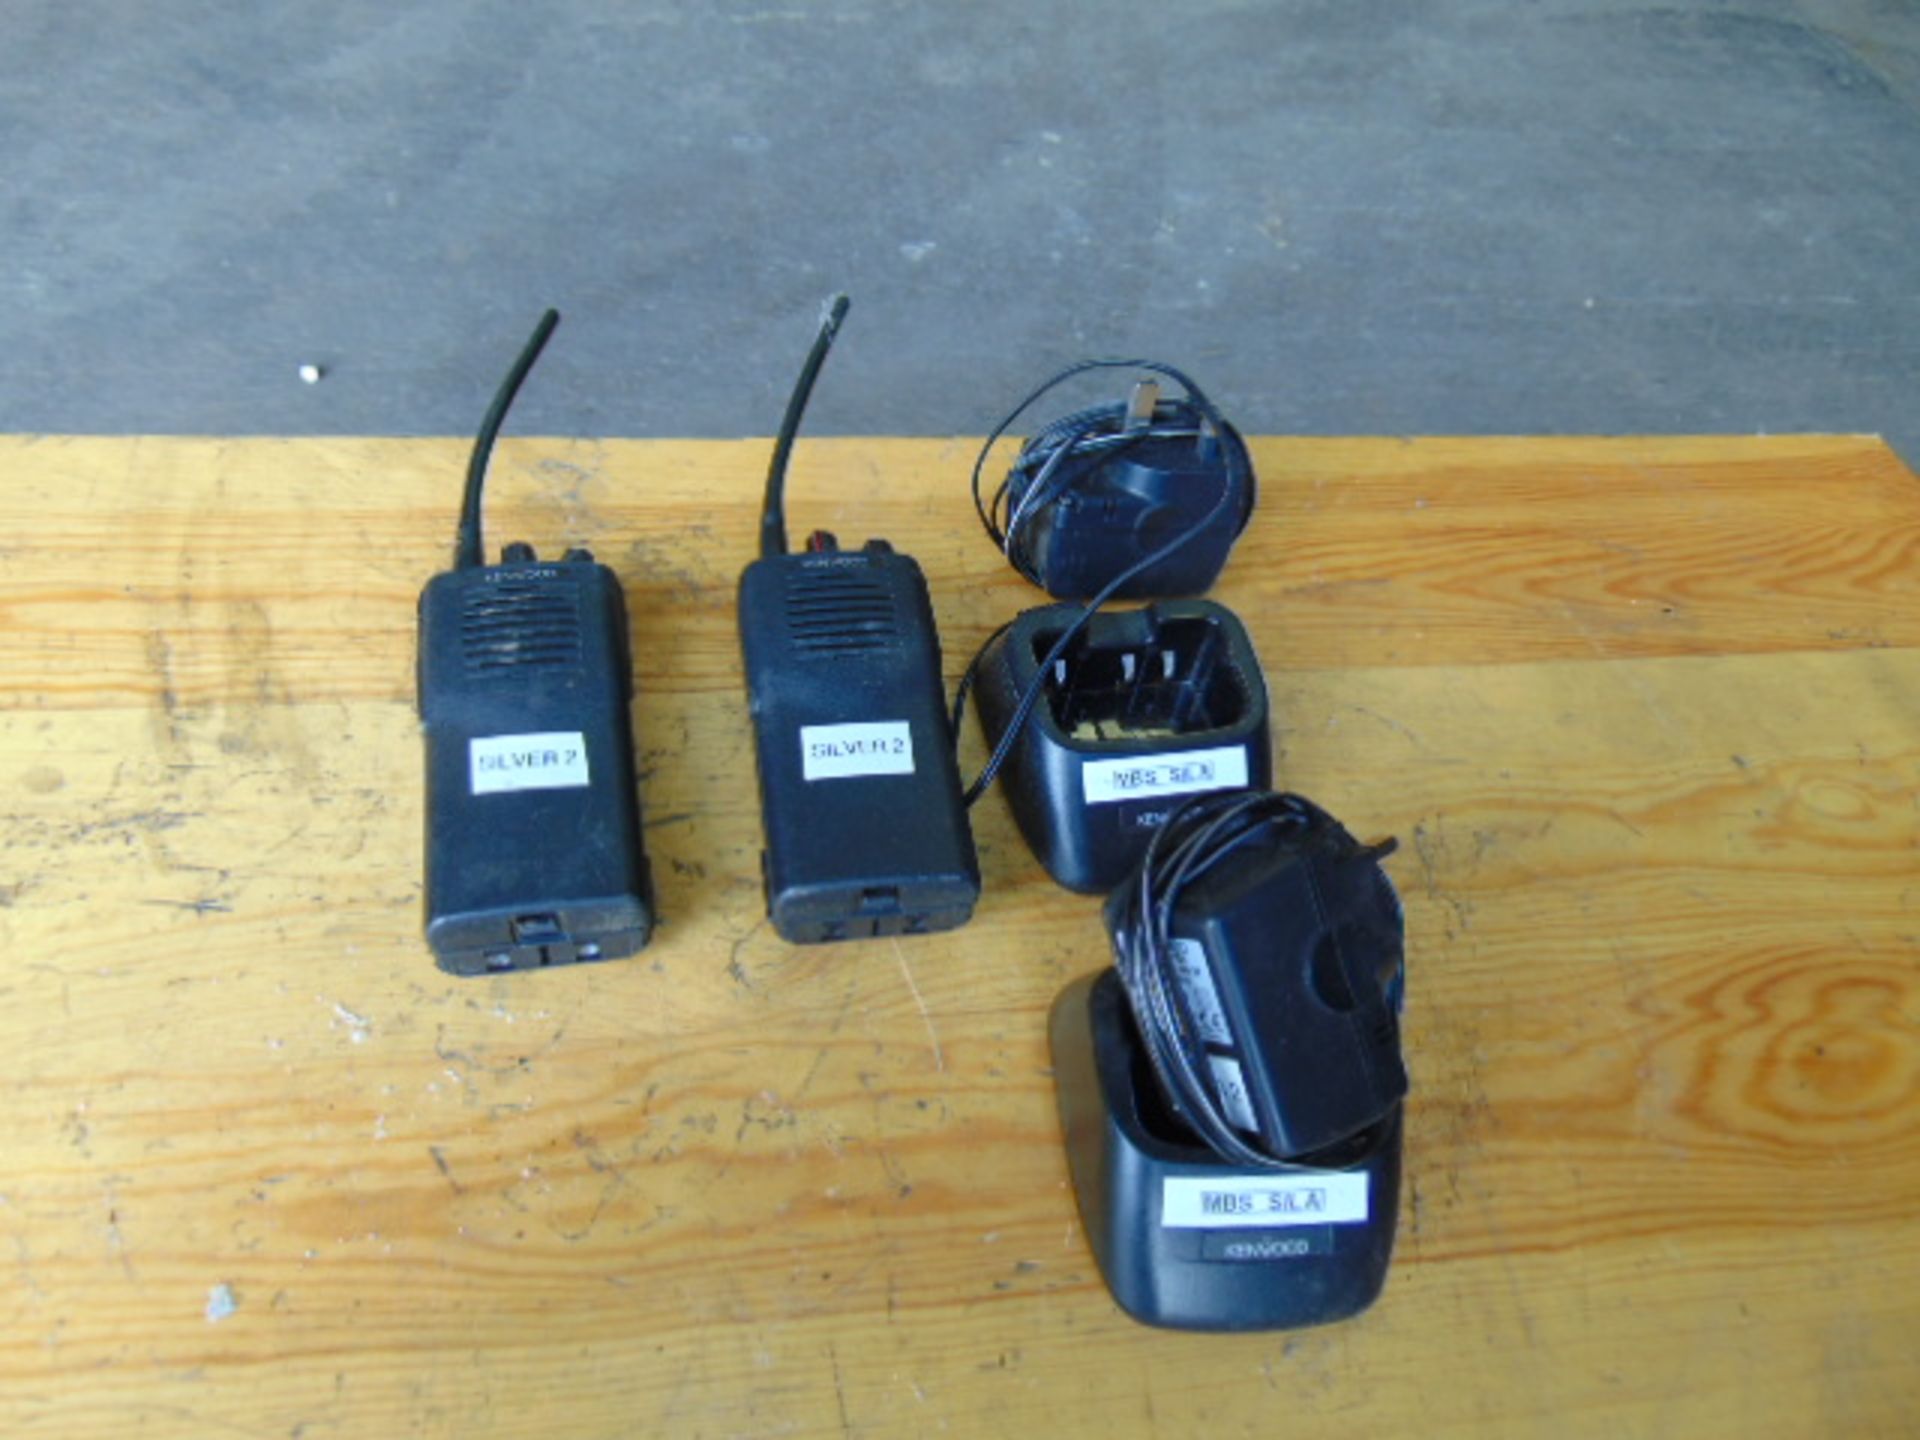 2 x Kenwood Walkie Talkies c/w Chargers and Main Adapters - Image 4 of 6